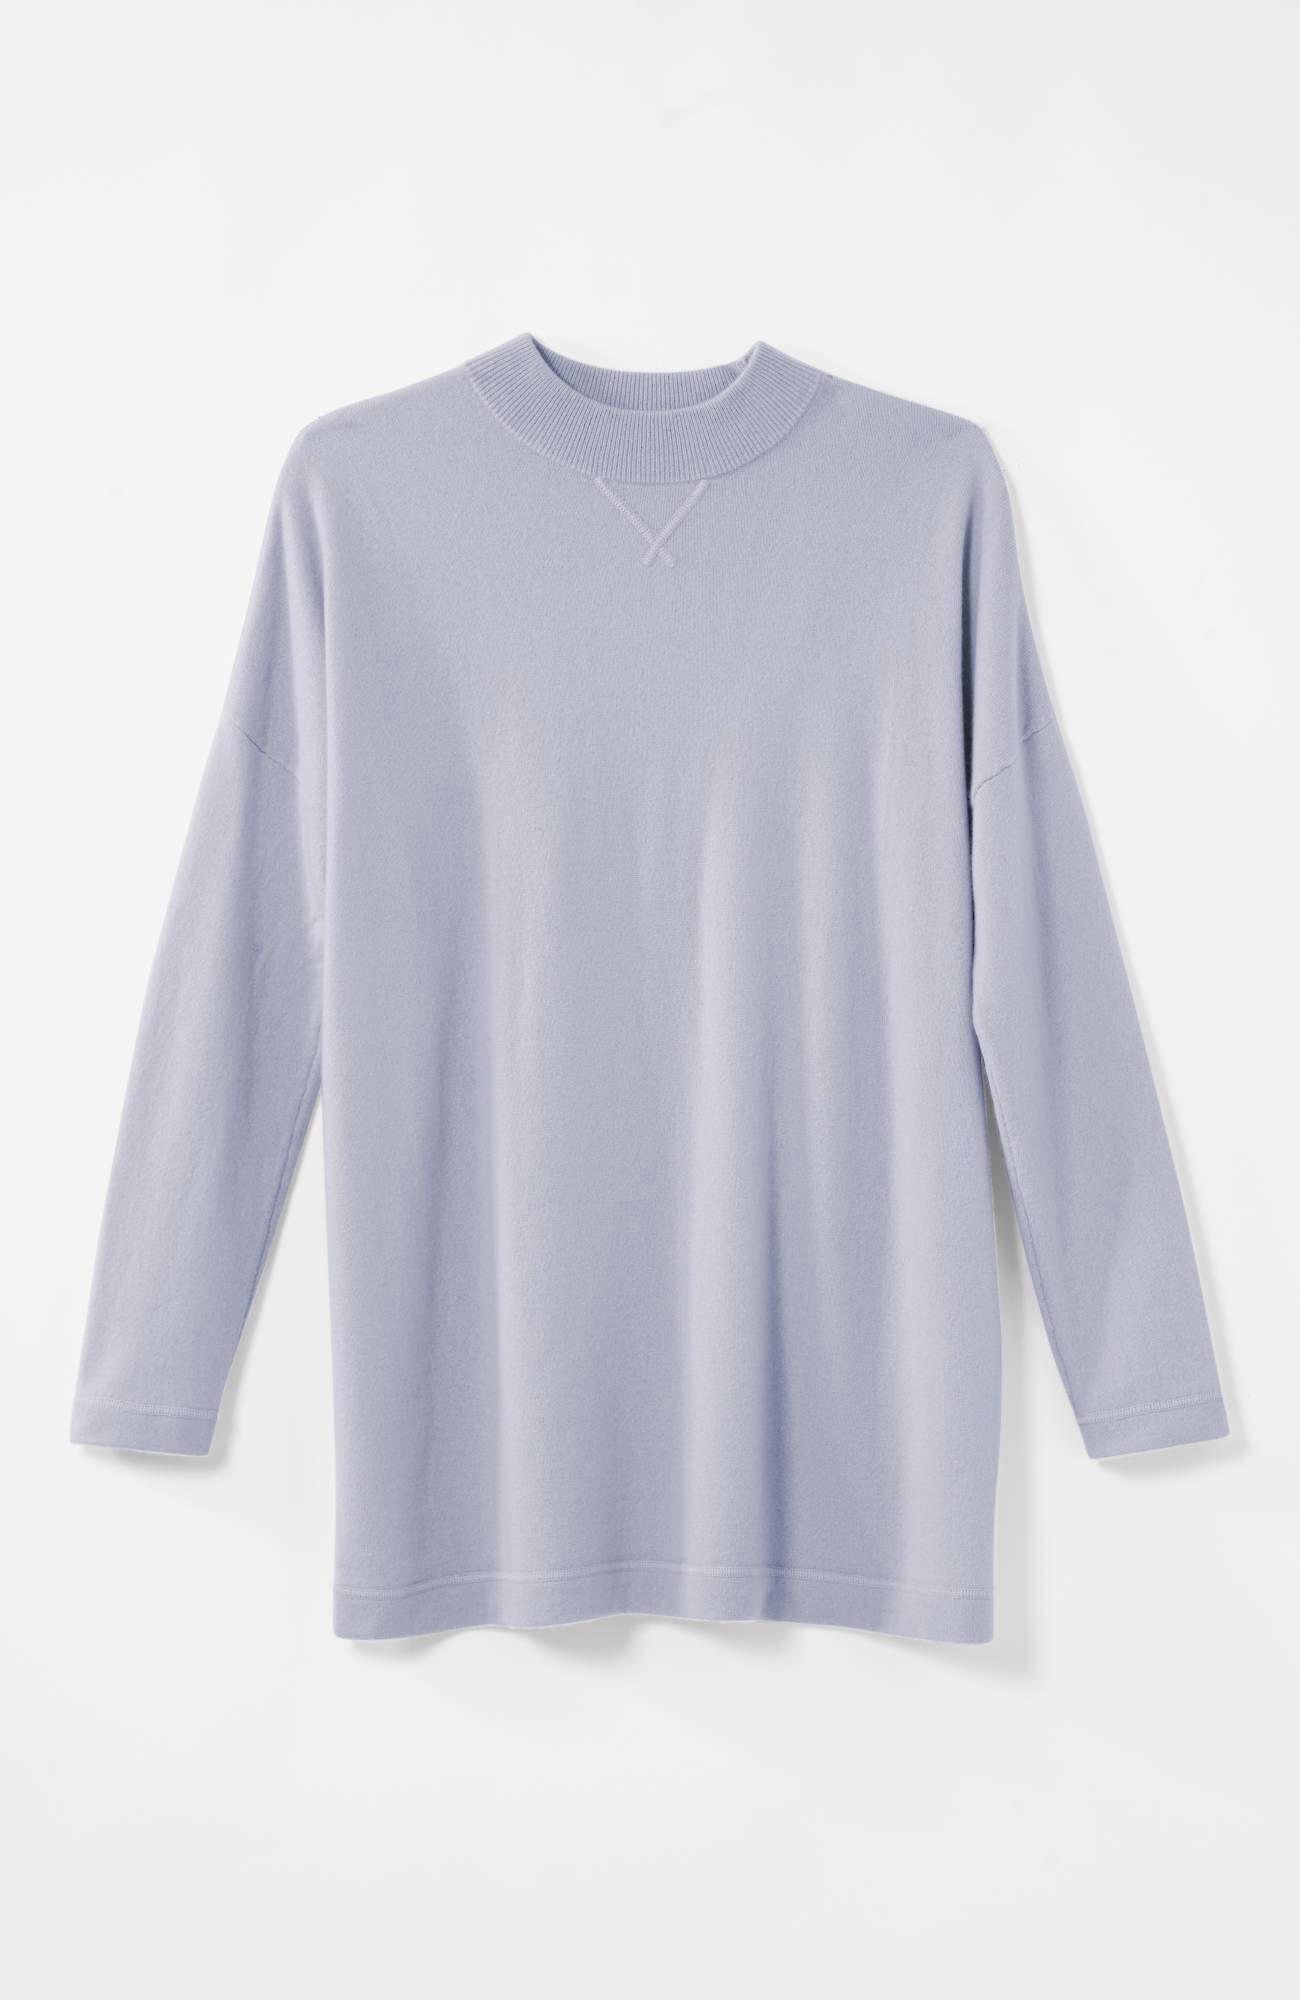 J.Jill Cashmere Relaxed Mock-Neck Tunic